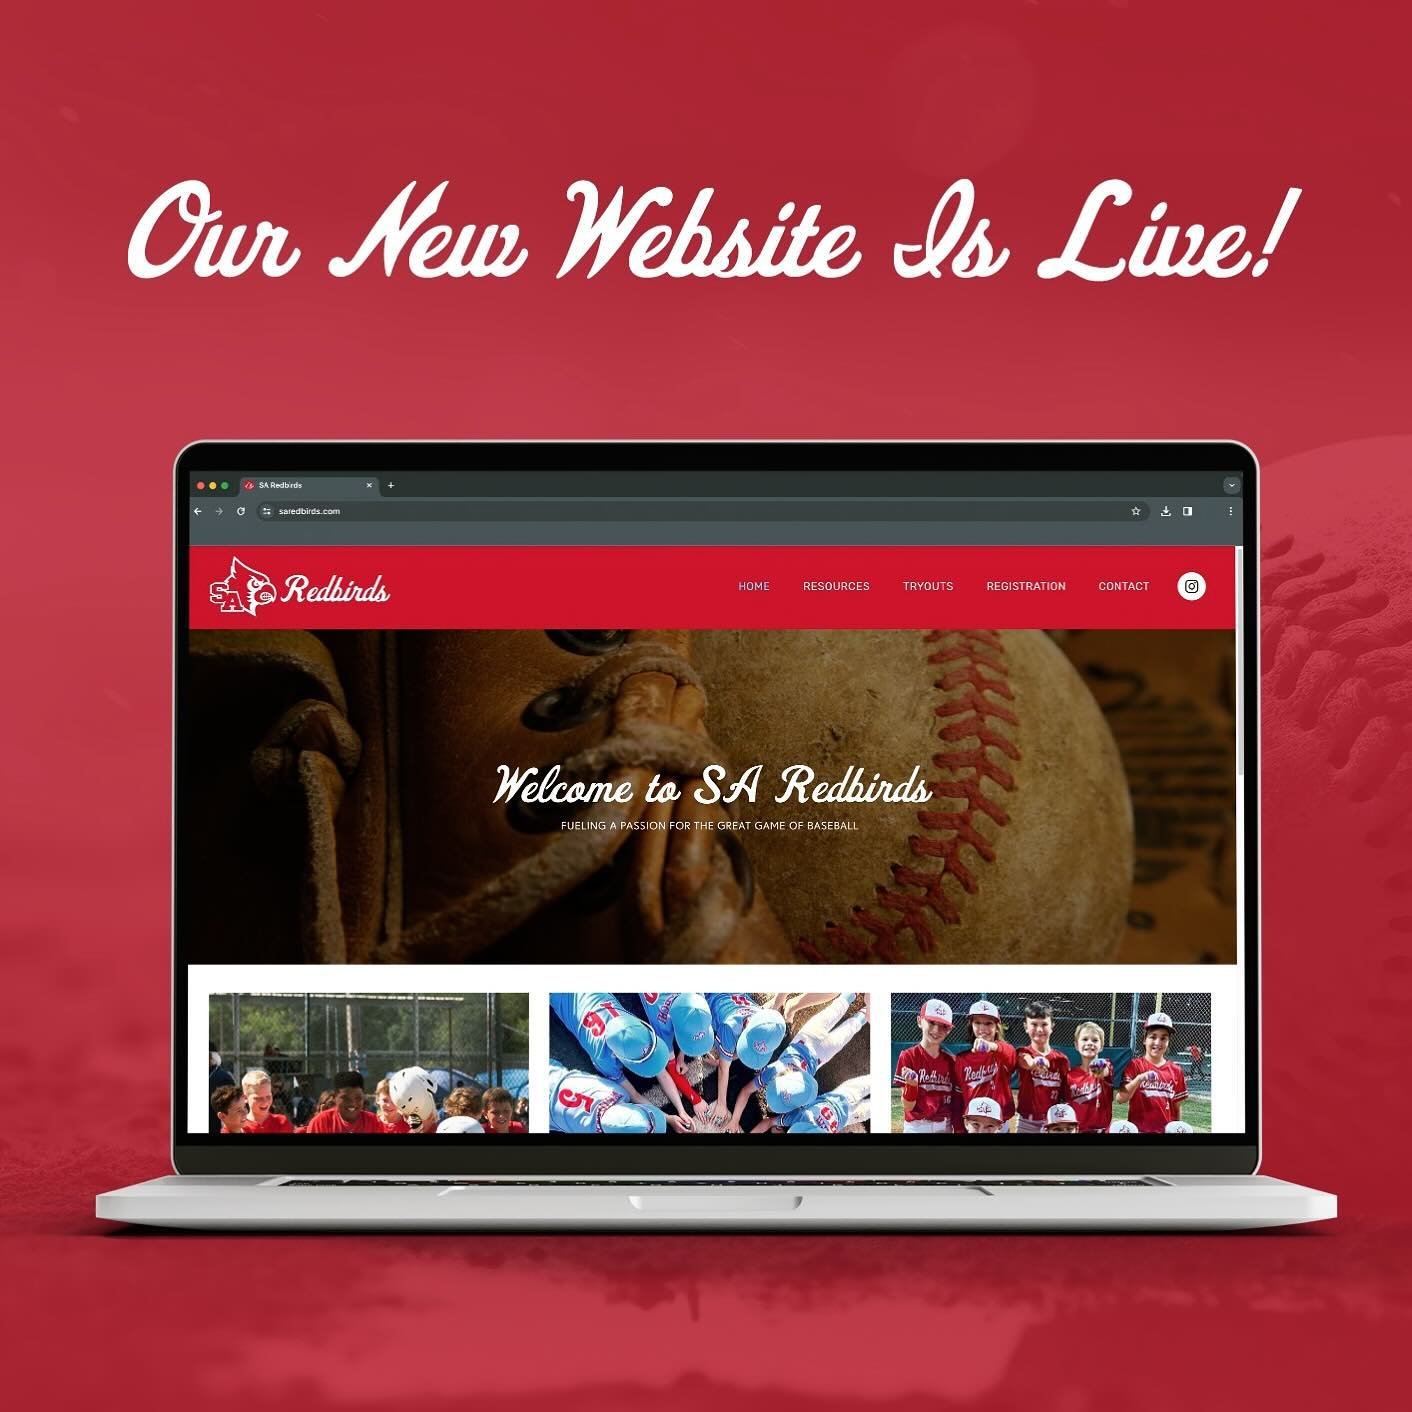 The new website for SA Redbirds is LIVE! The new website includes details about tryouts for the 2024-2025 season, registration forms, photo galleries, frequently asked questions, online store (coming soon), and more. Go Redbirds! #saredbirds ⚾️